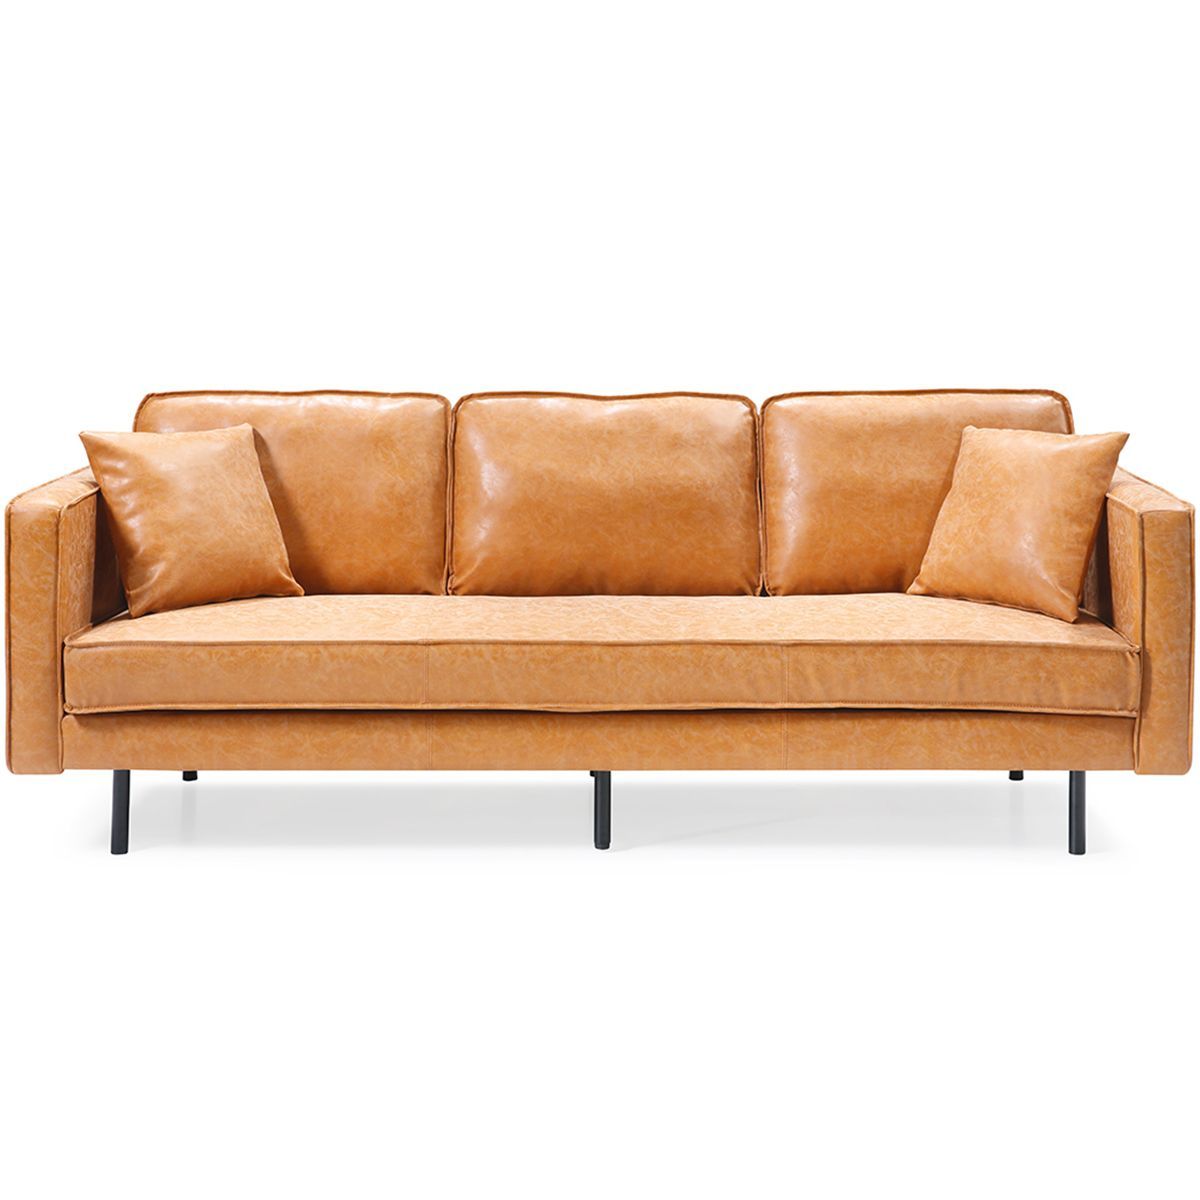 Verona 3 Seater Faux Leather Sofa | Temple & Webster Faux Leather Sofa In Traditional 3 Seater Faux Leather Sofas (Gallery 9 of 20)